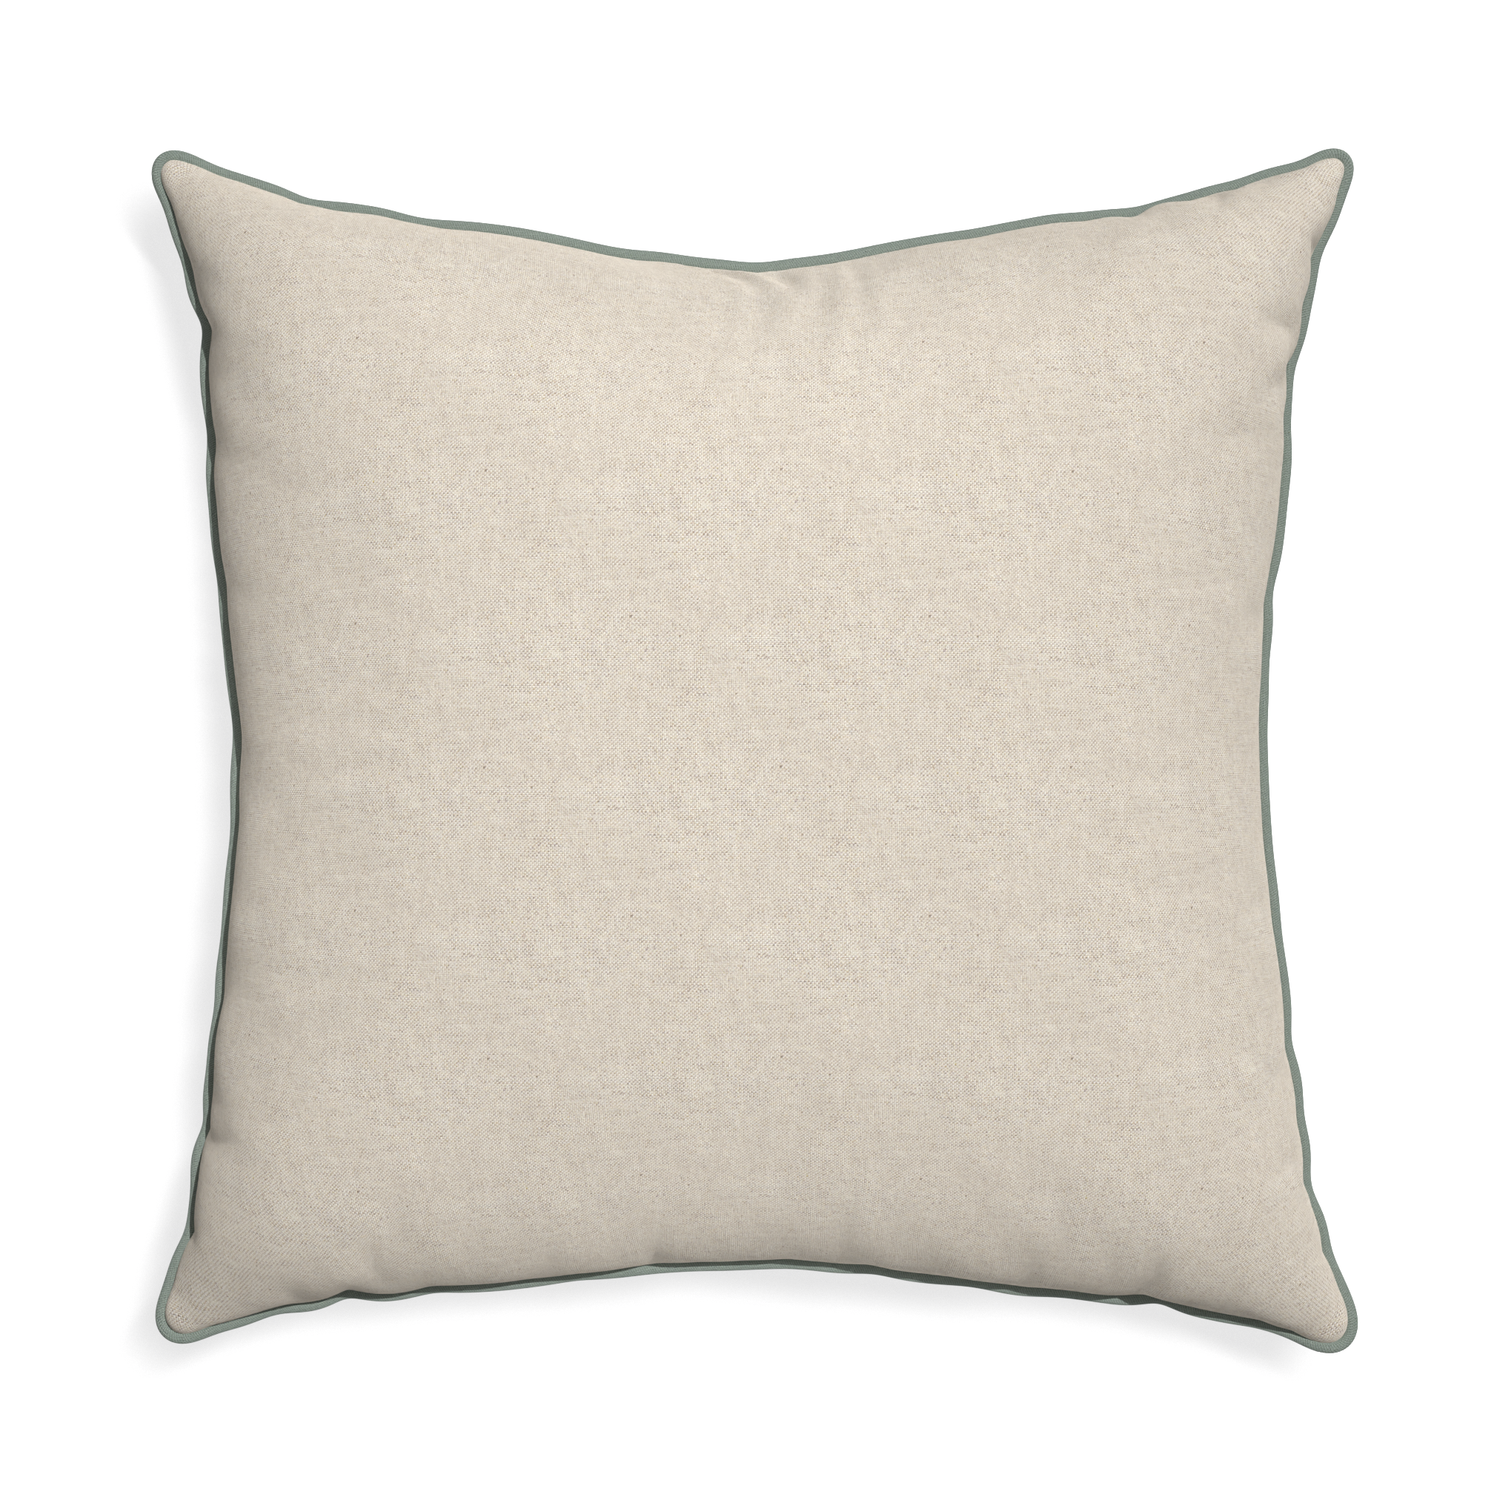 Euro-sham oat custom light brownpillow with sage piping on white background